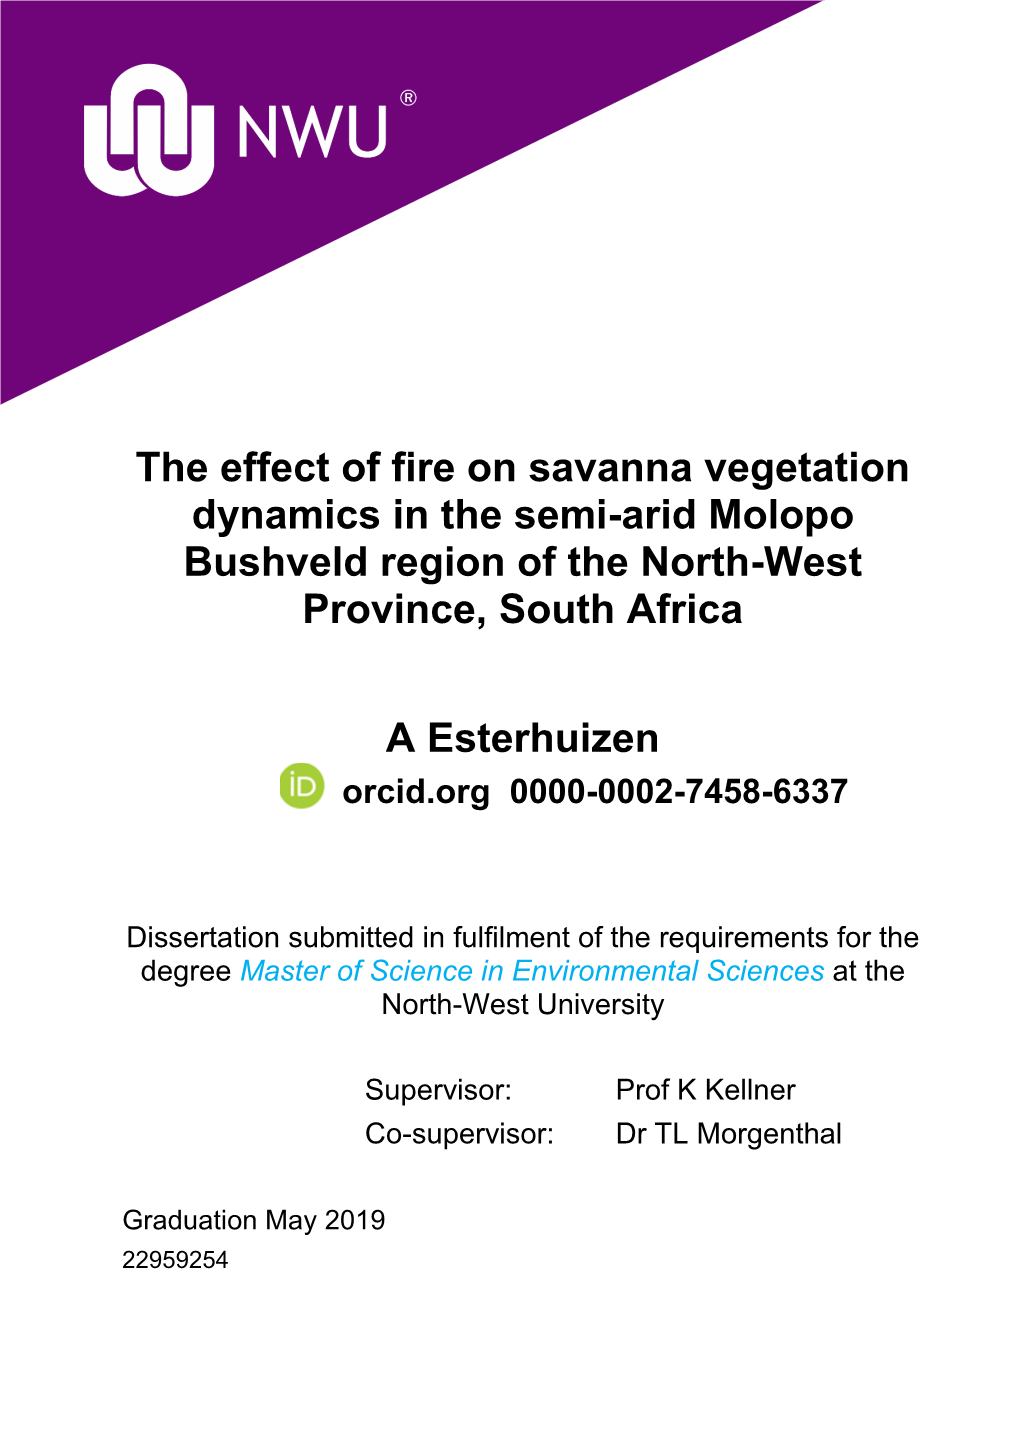 The Effect of Fire on Savanna Vegetation Dynamics in the Semi-Arid Molopo Bushveld Region of the North-West Province, South Africa